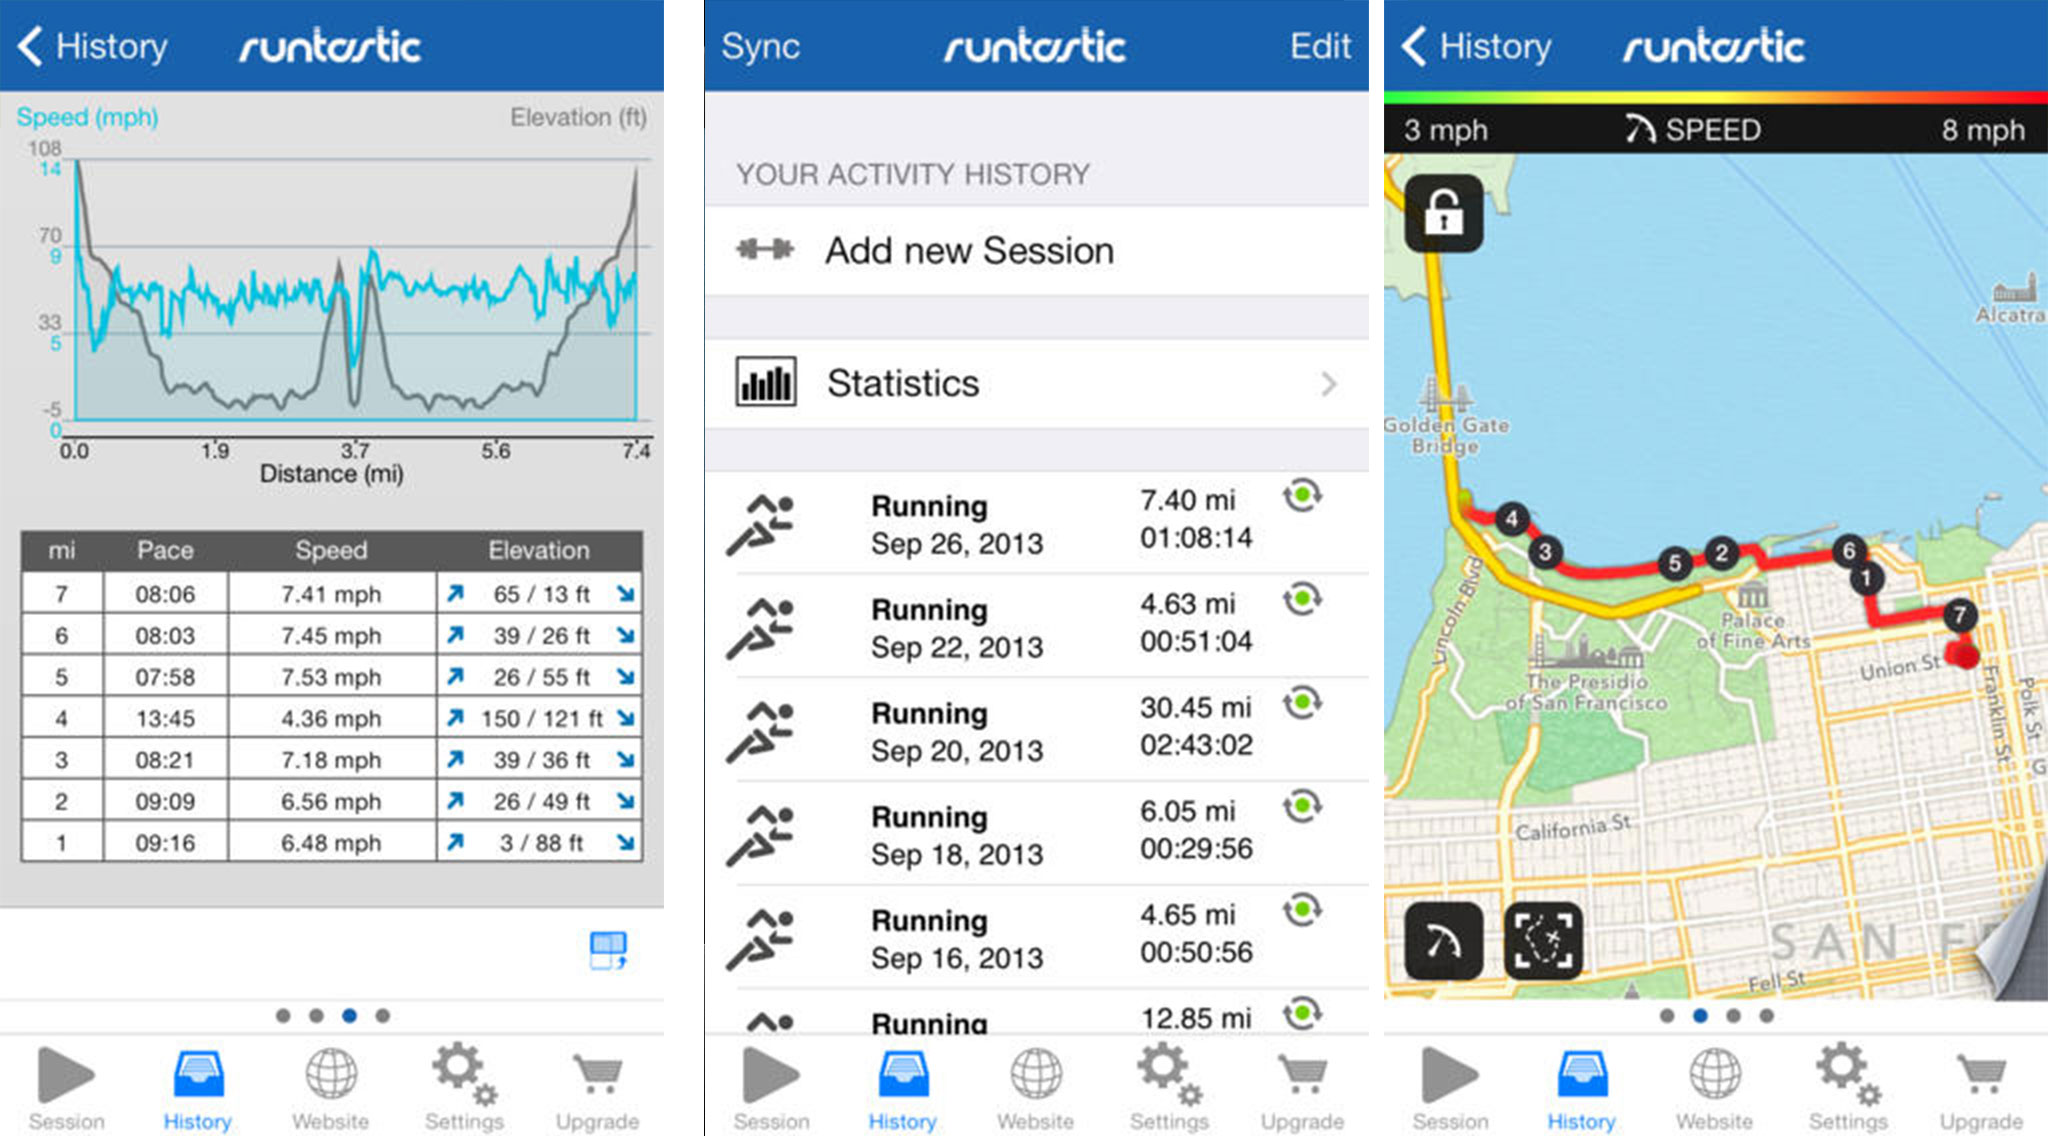 Best run tracking apps for iPhone: Runtastic